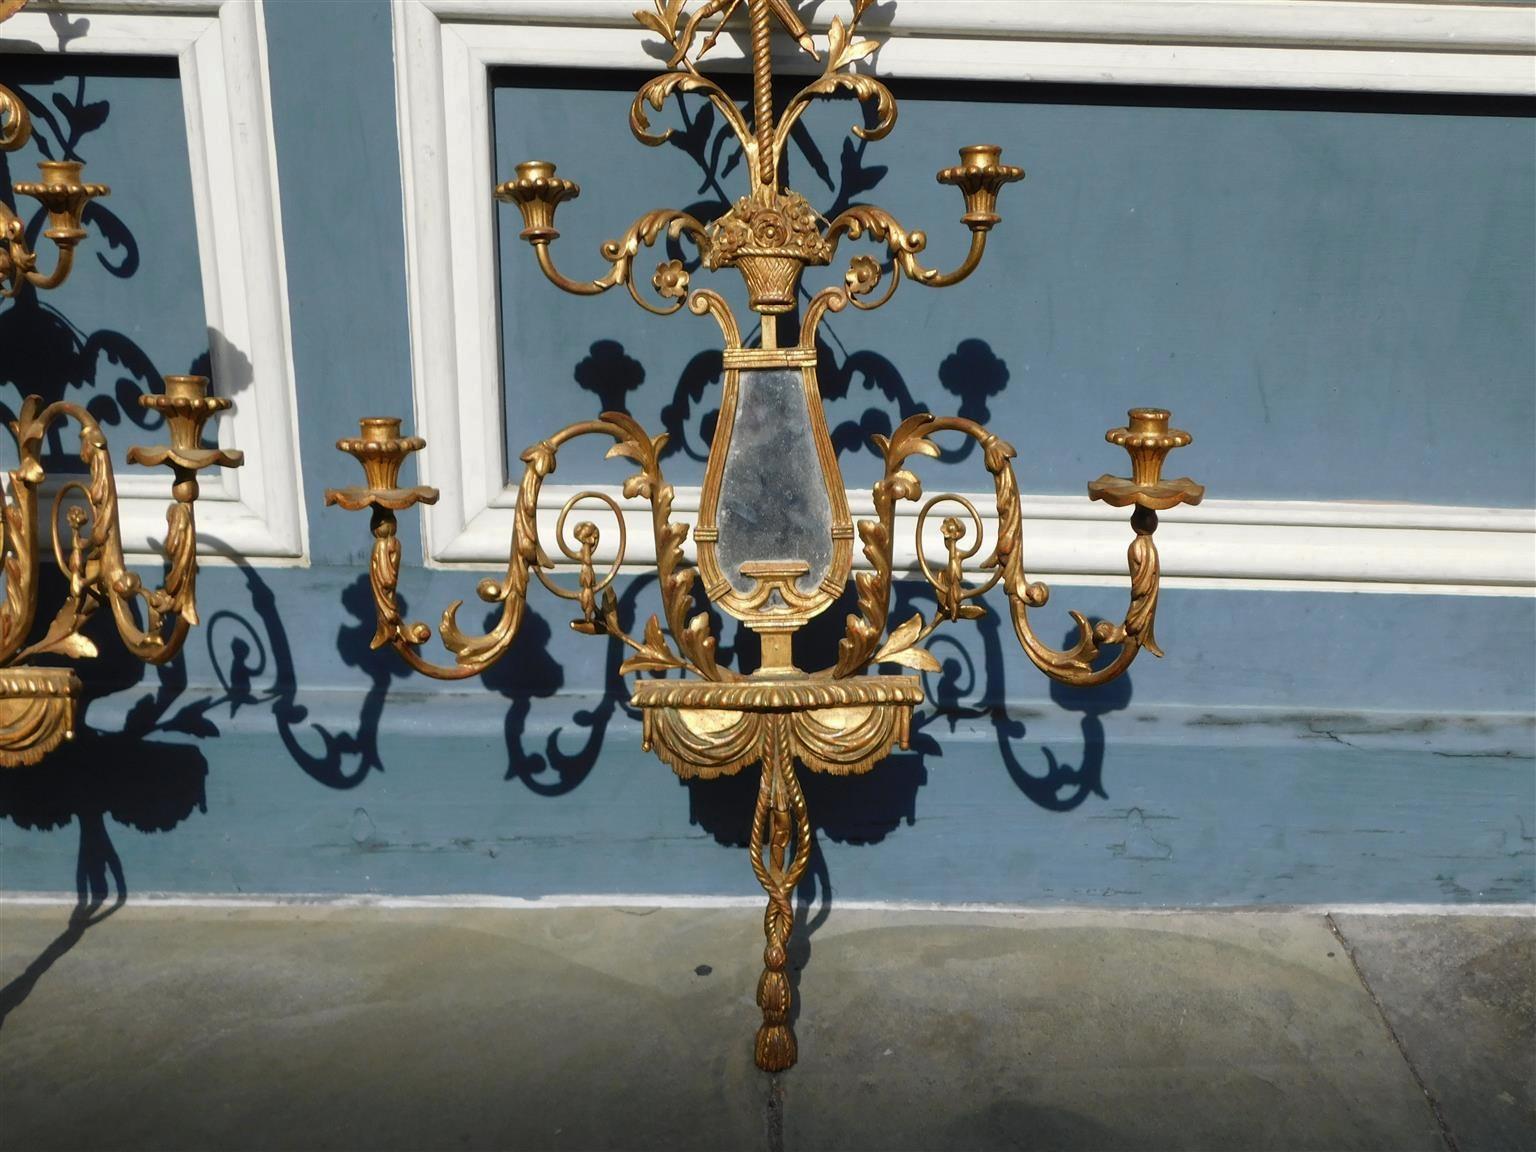 Pair of French Gilt Wood & Gesso Four Arm Foliage & Mirror Wall Sconces, C. 1820 For Sale 1